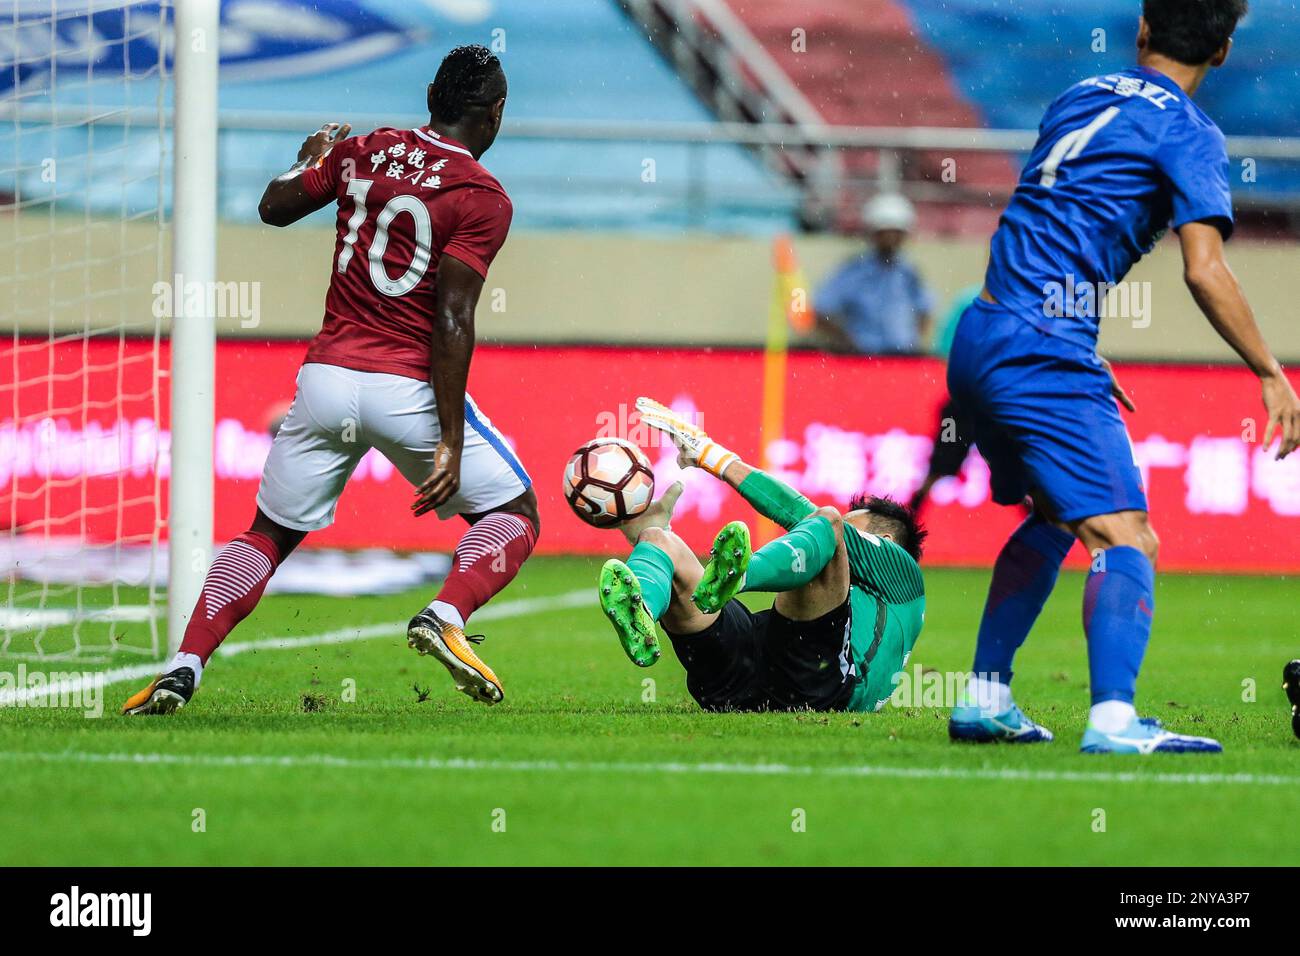 Cameroonian football player Christian Bassogog, left, of Henan Jianye, shoots against Shanghai Greenland Shenhua in their 24th round match during the 2017 Chinese Football Association Super League (CSL) in Shanghai, China, 10 September 2017.(Imaginechina via AP Images) Foto Stock